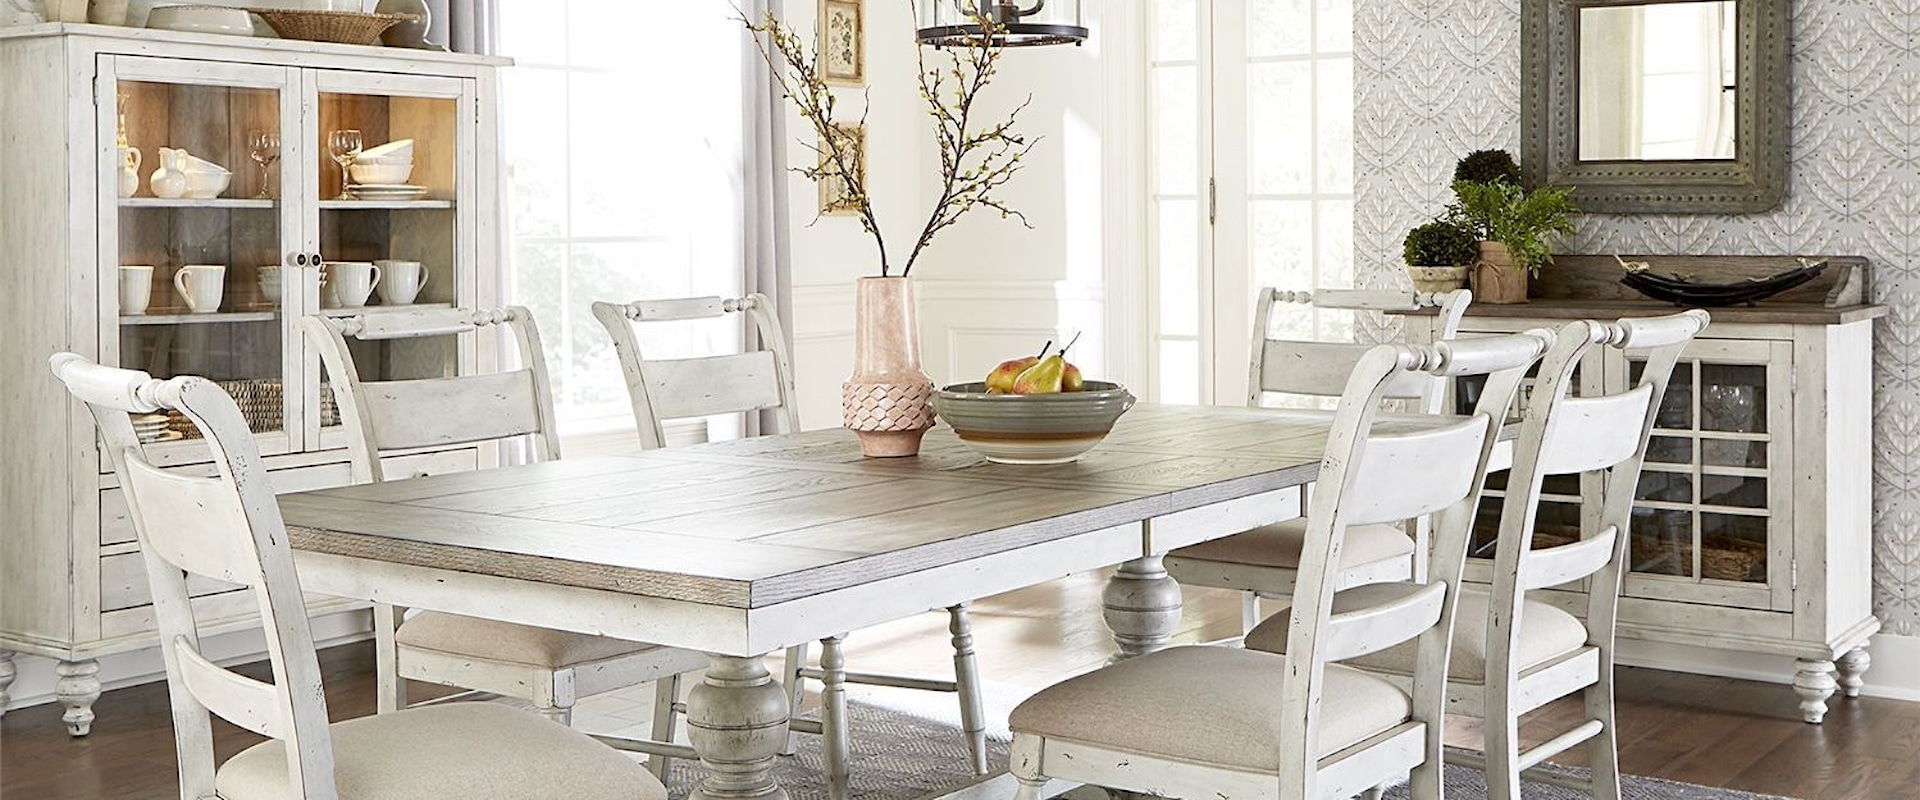 7 Piece Trestle Dining Room Table Set